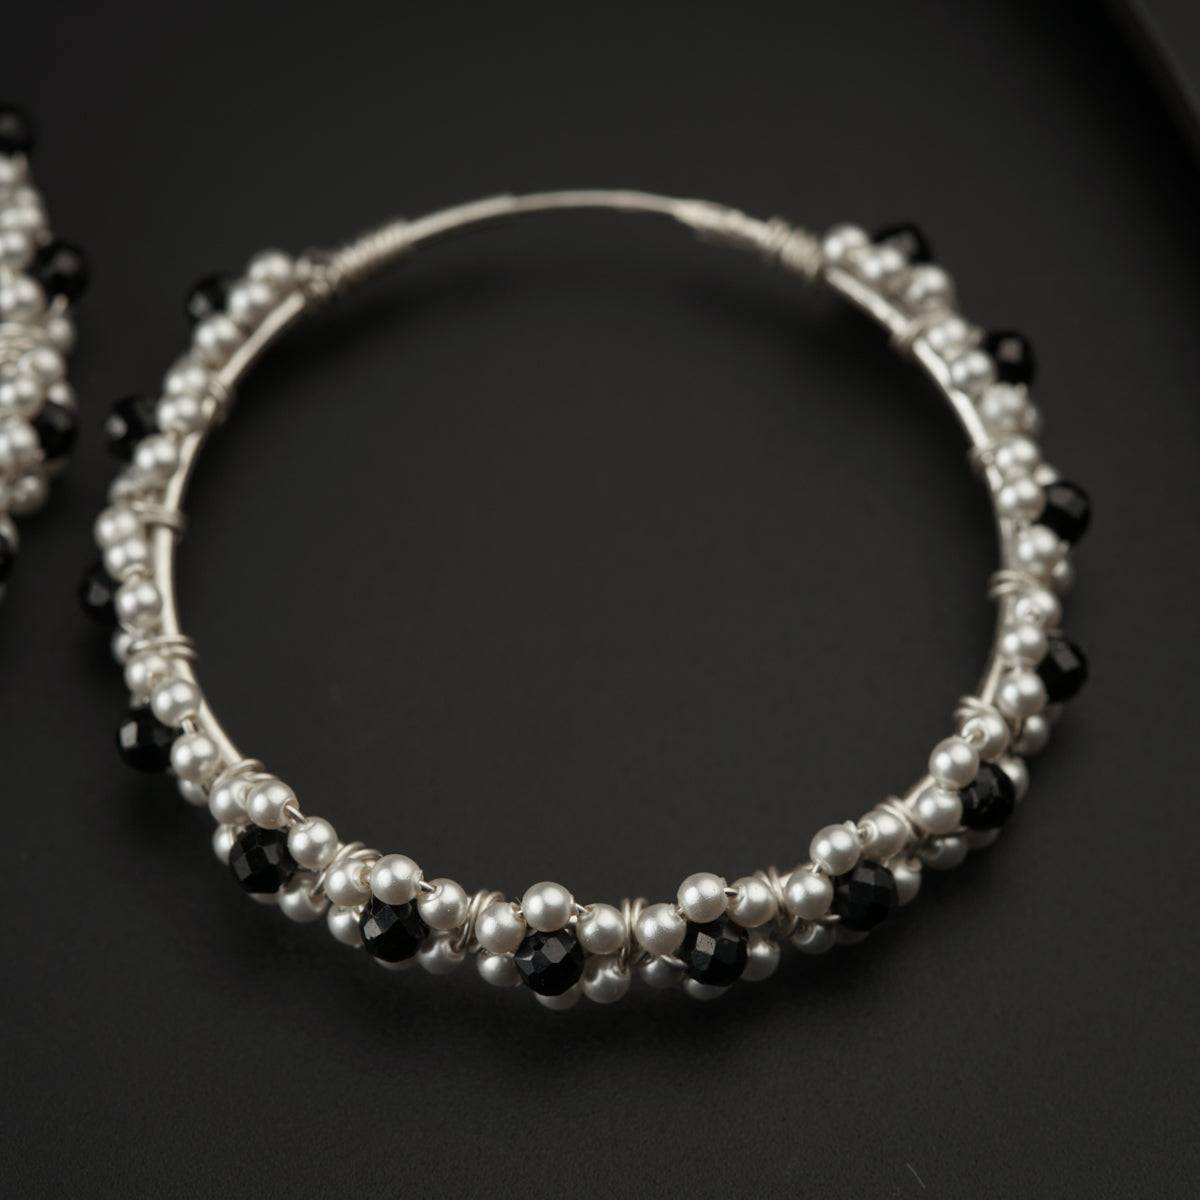 Silver Hoops with Pearls and Black Spinel